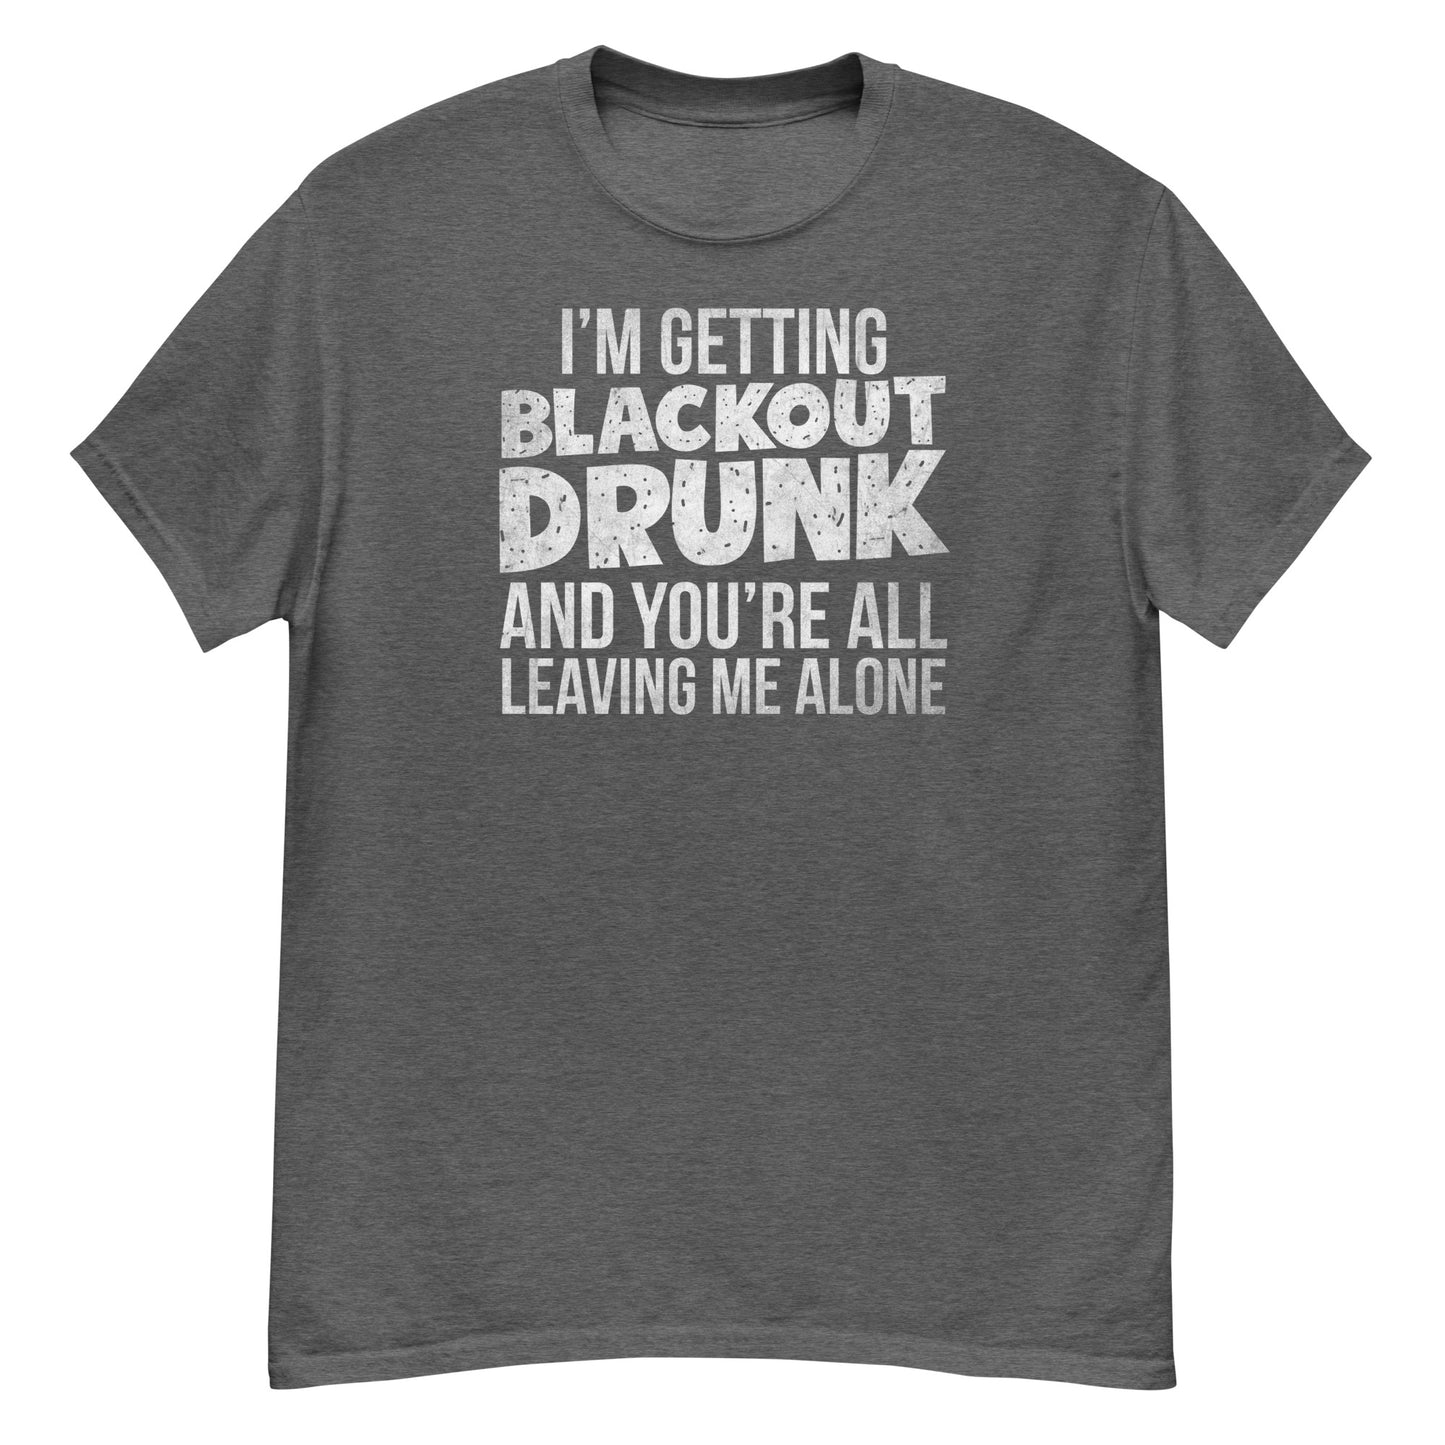 I'm Getting Blackout Drunk classic tee